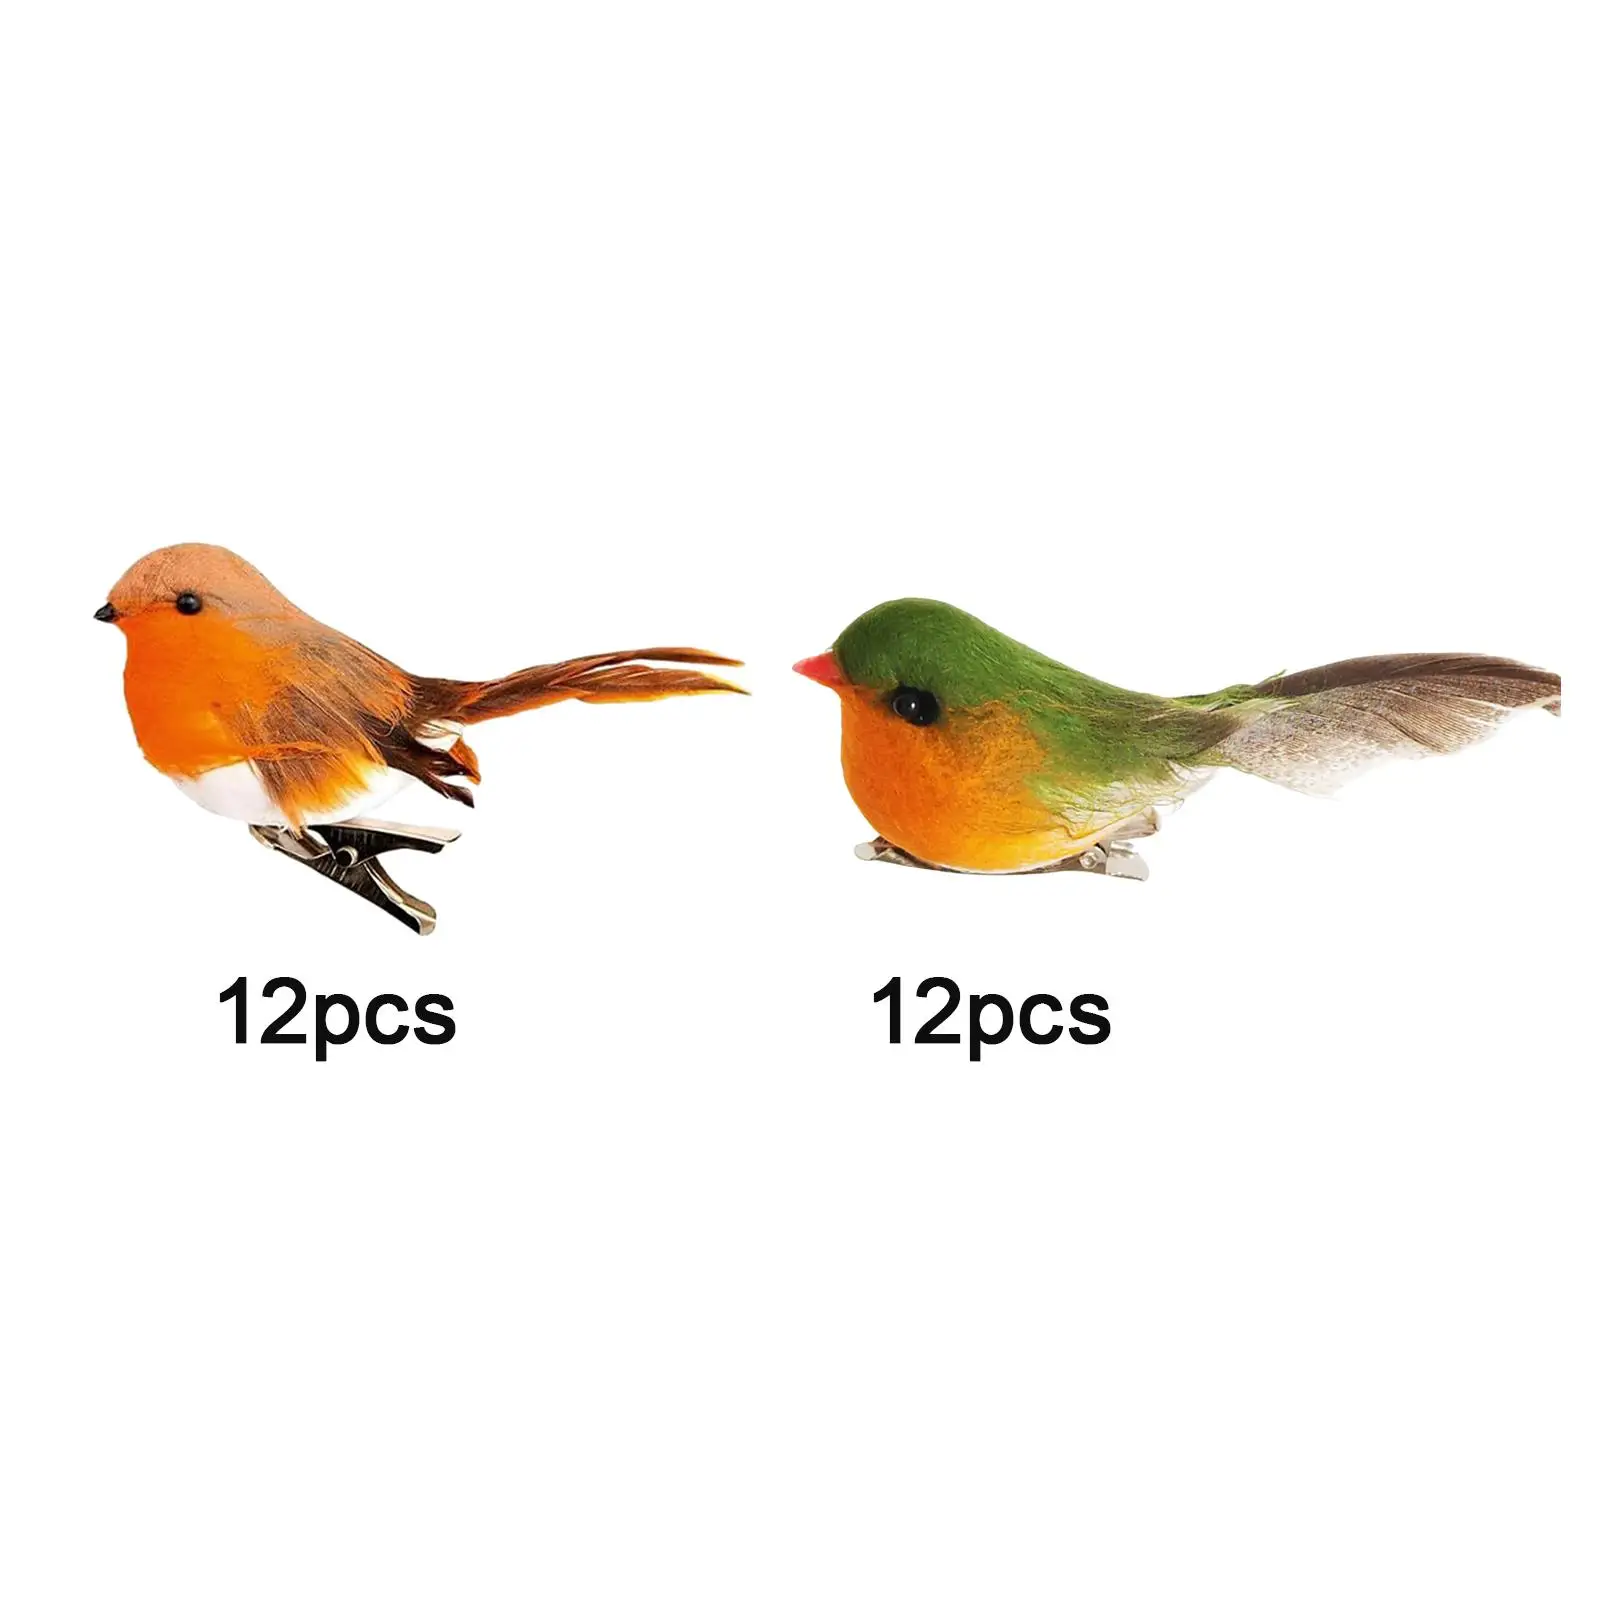 12Pcs Fake Foam Birds with Clips Realistic Looking Beautiful Artificial Birds for Tree Decoration Porch Patio Handicraft Lawn